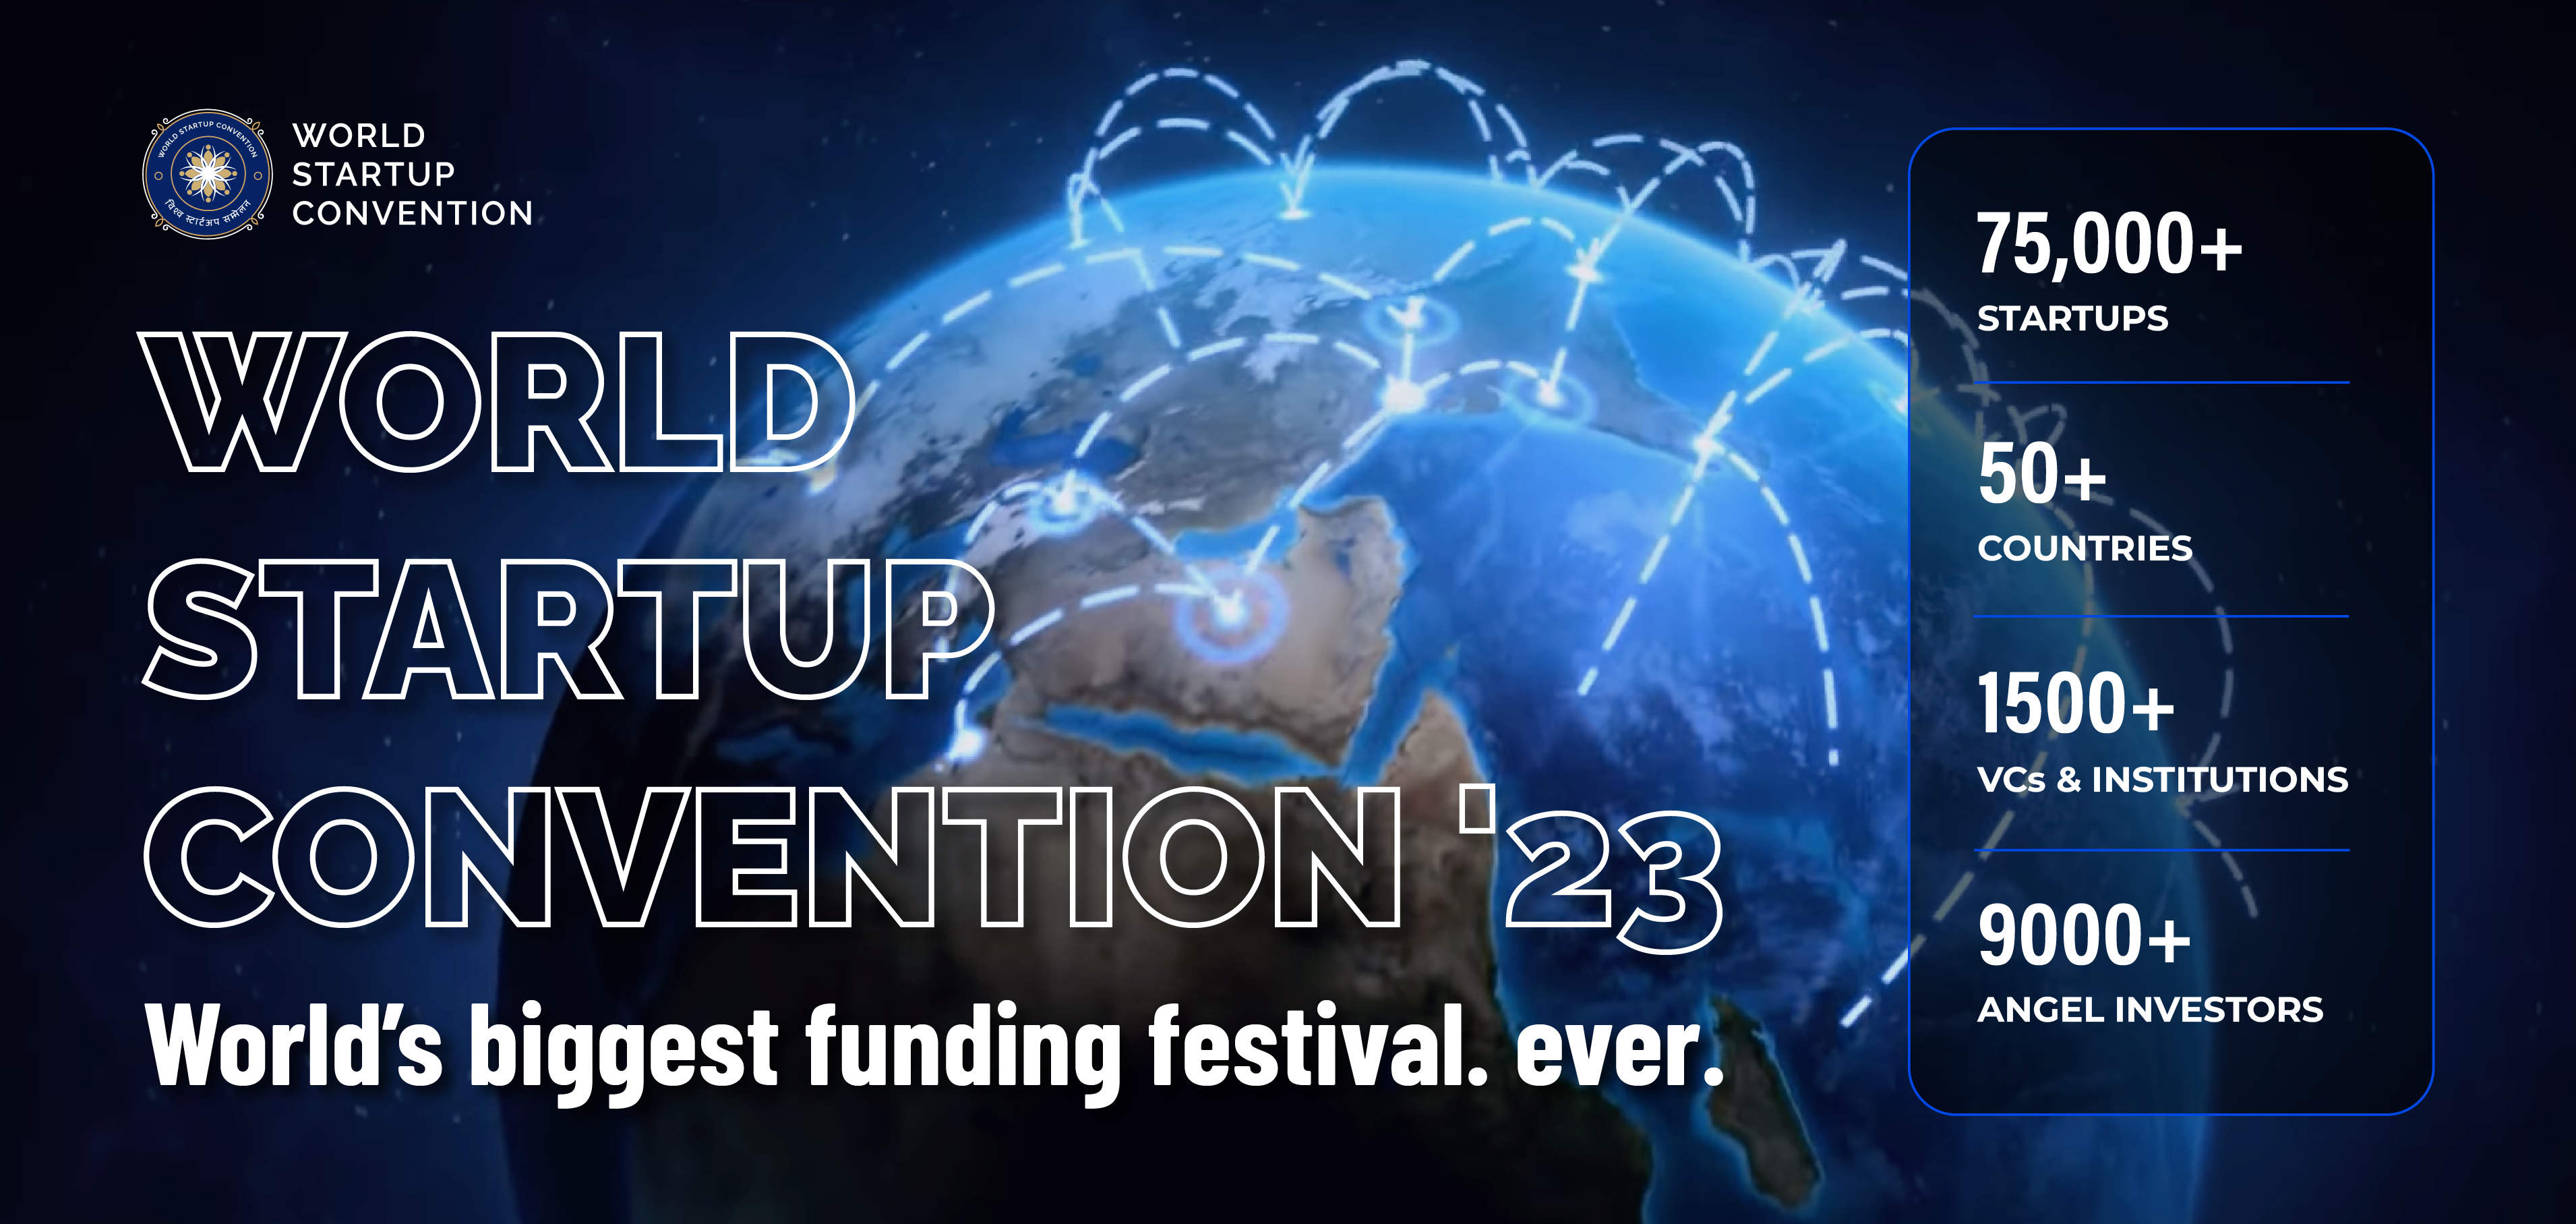 World Startup Convention 2023 Ready to Host the World’s Biggest Startup Funding Festival at the India Expo Mart